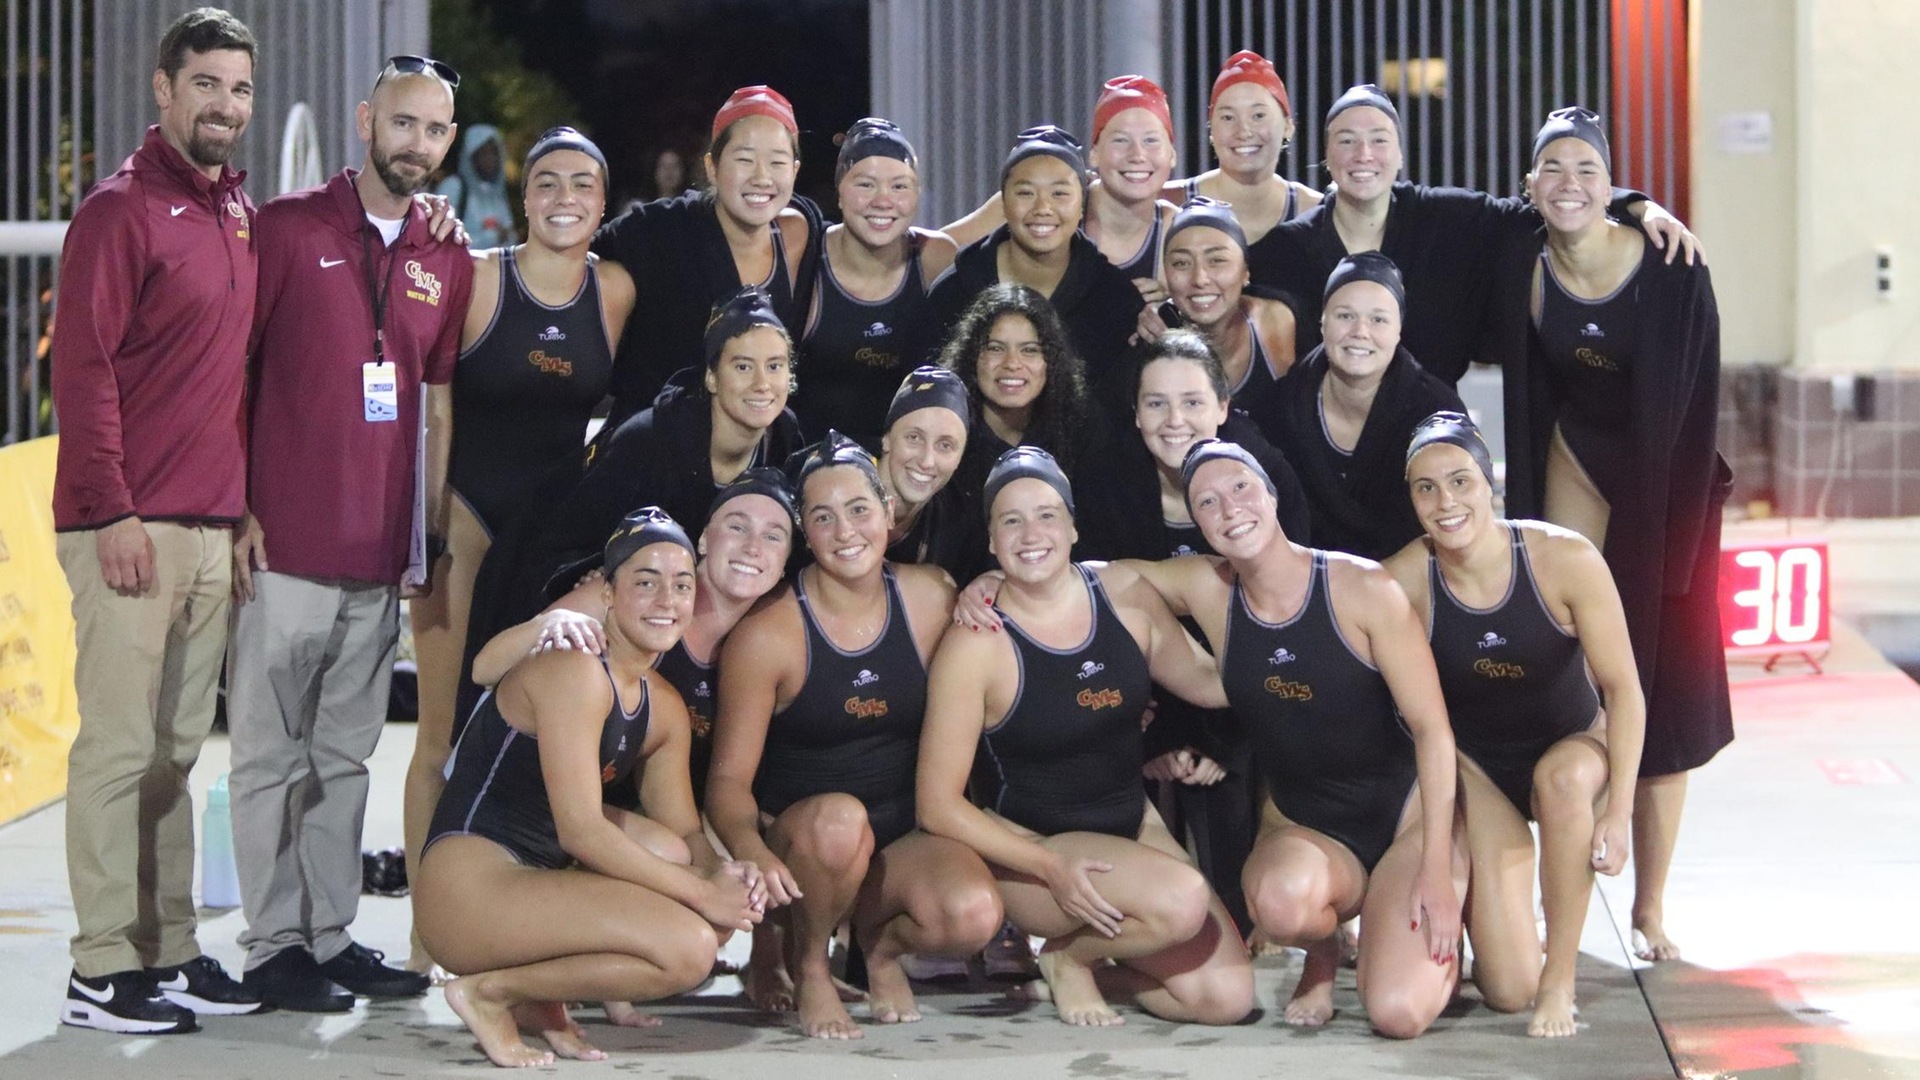 CMS women's water polo will be competing in a national tournament for the first time since 2006